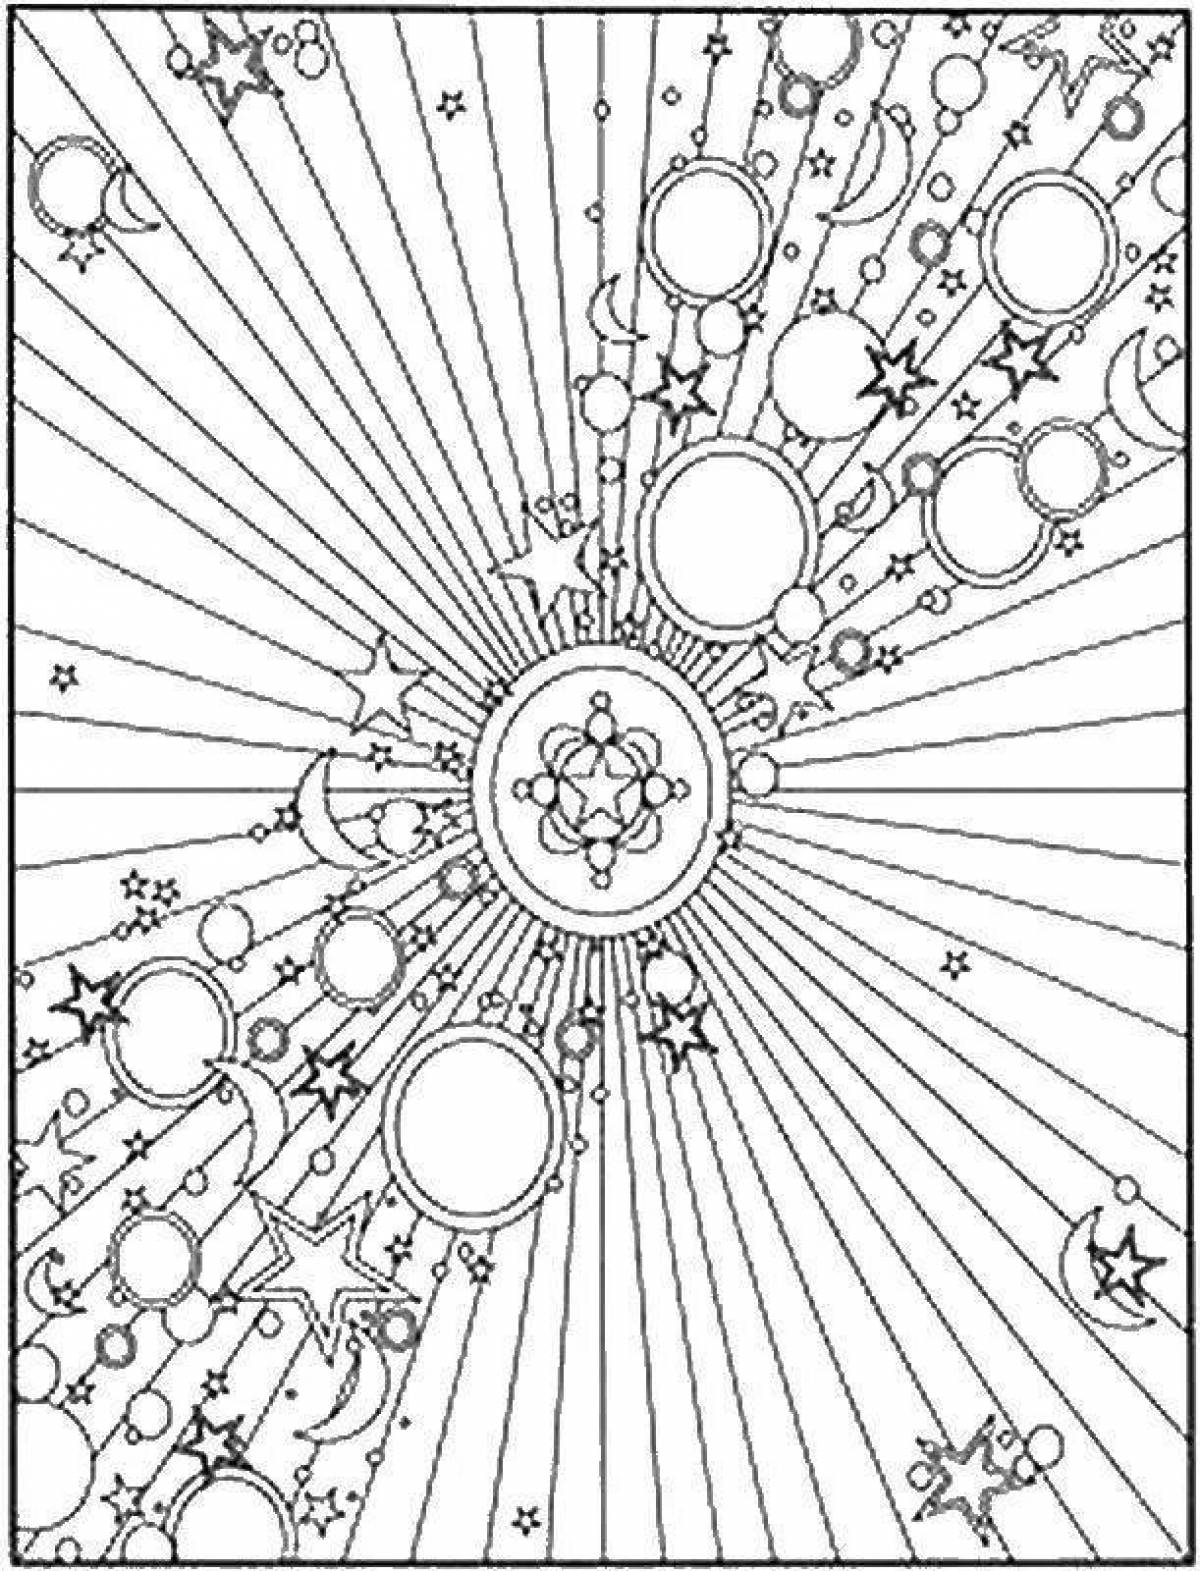 Soothing coloring book antistress space